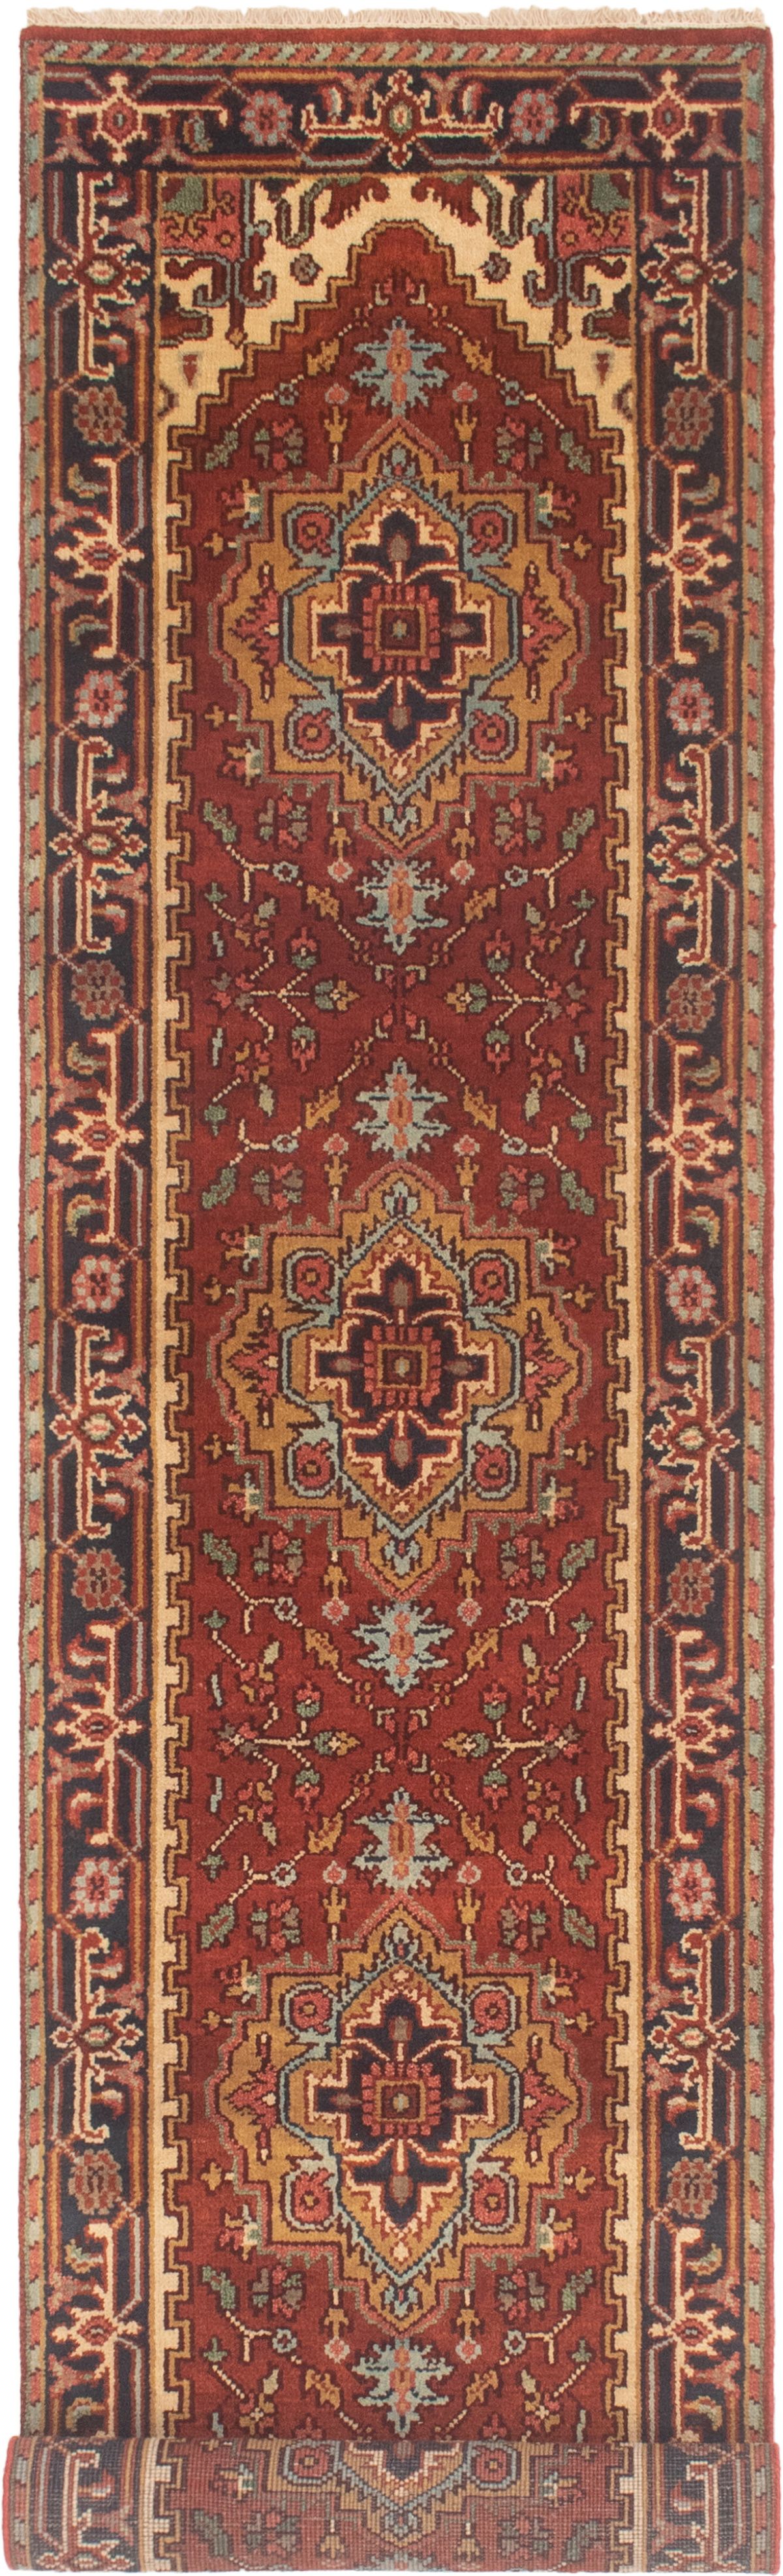 Hand-knotted Serapi Heritage Dark Copper Wool Rug 2'6" x 11'10" (18) Size: 2'6" x 11'10"  